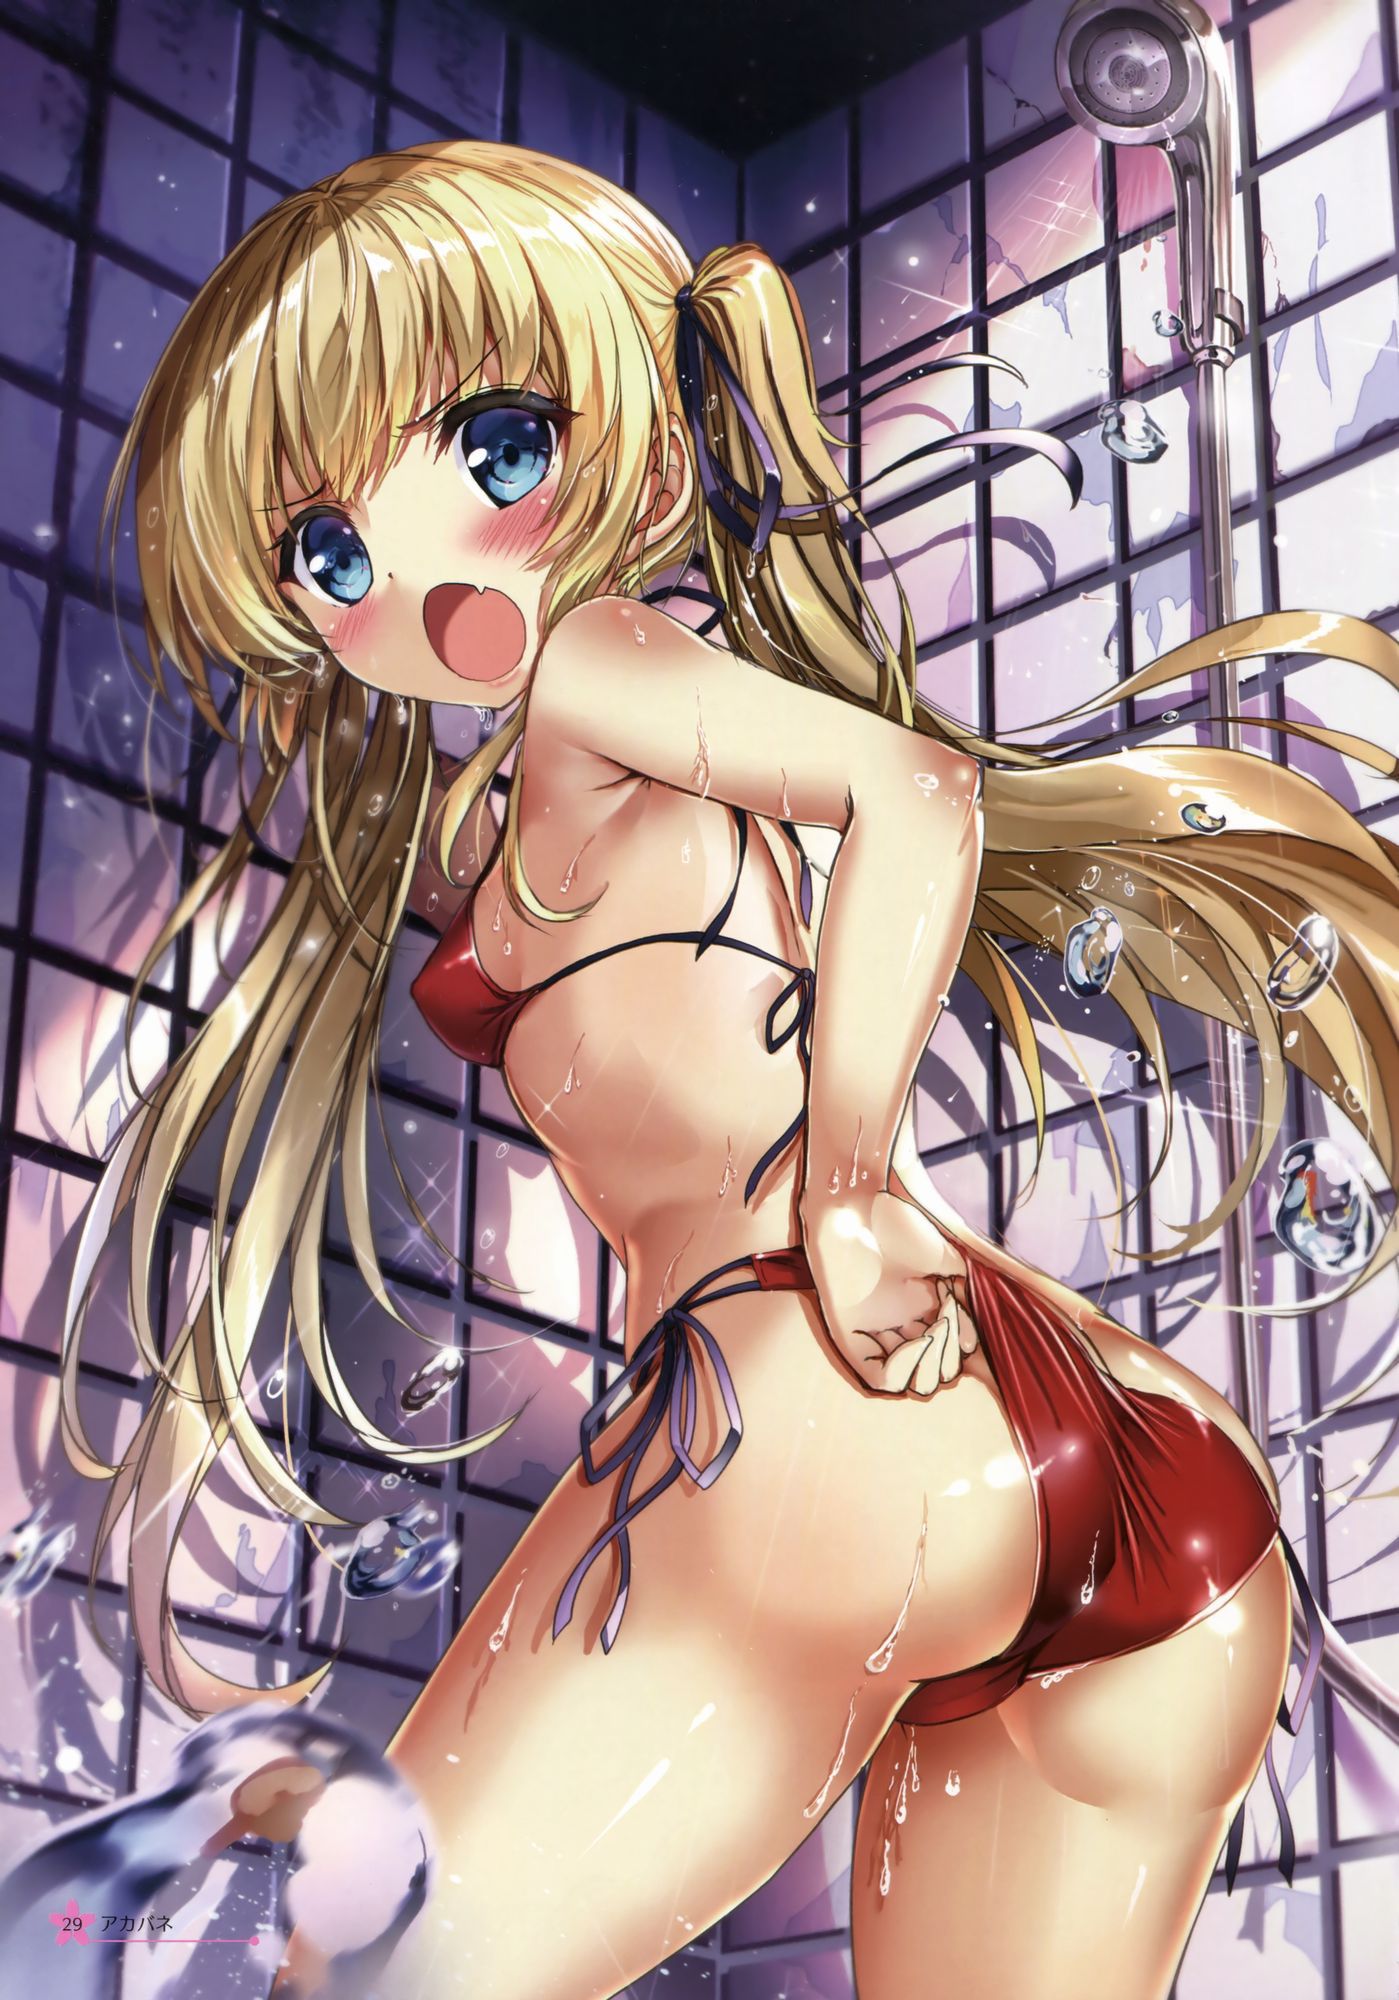 [2nd] Second erotic image of a girl in swimsuit part 28 [swimsuit] 20